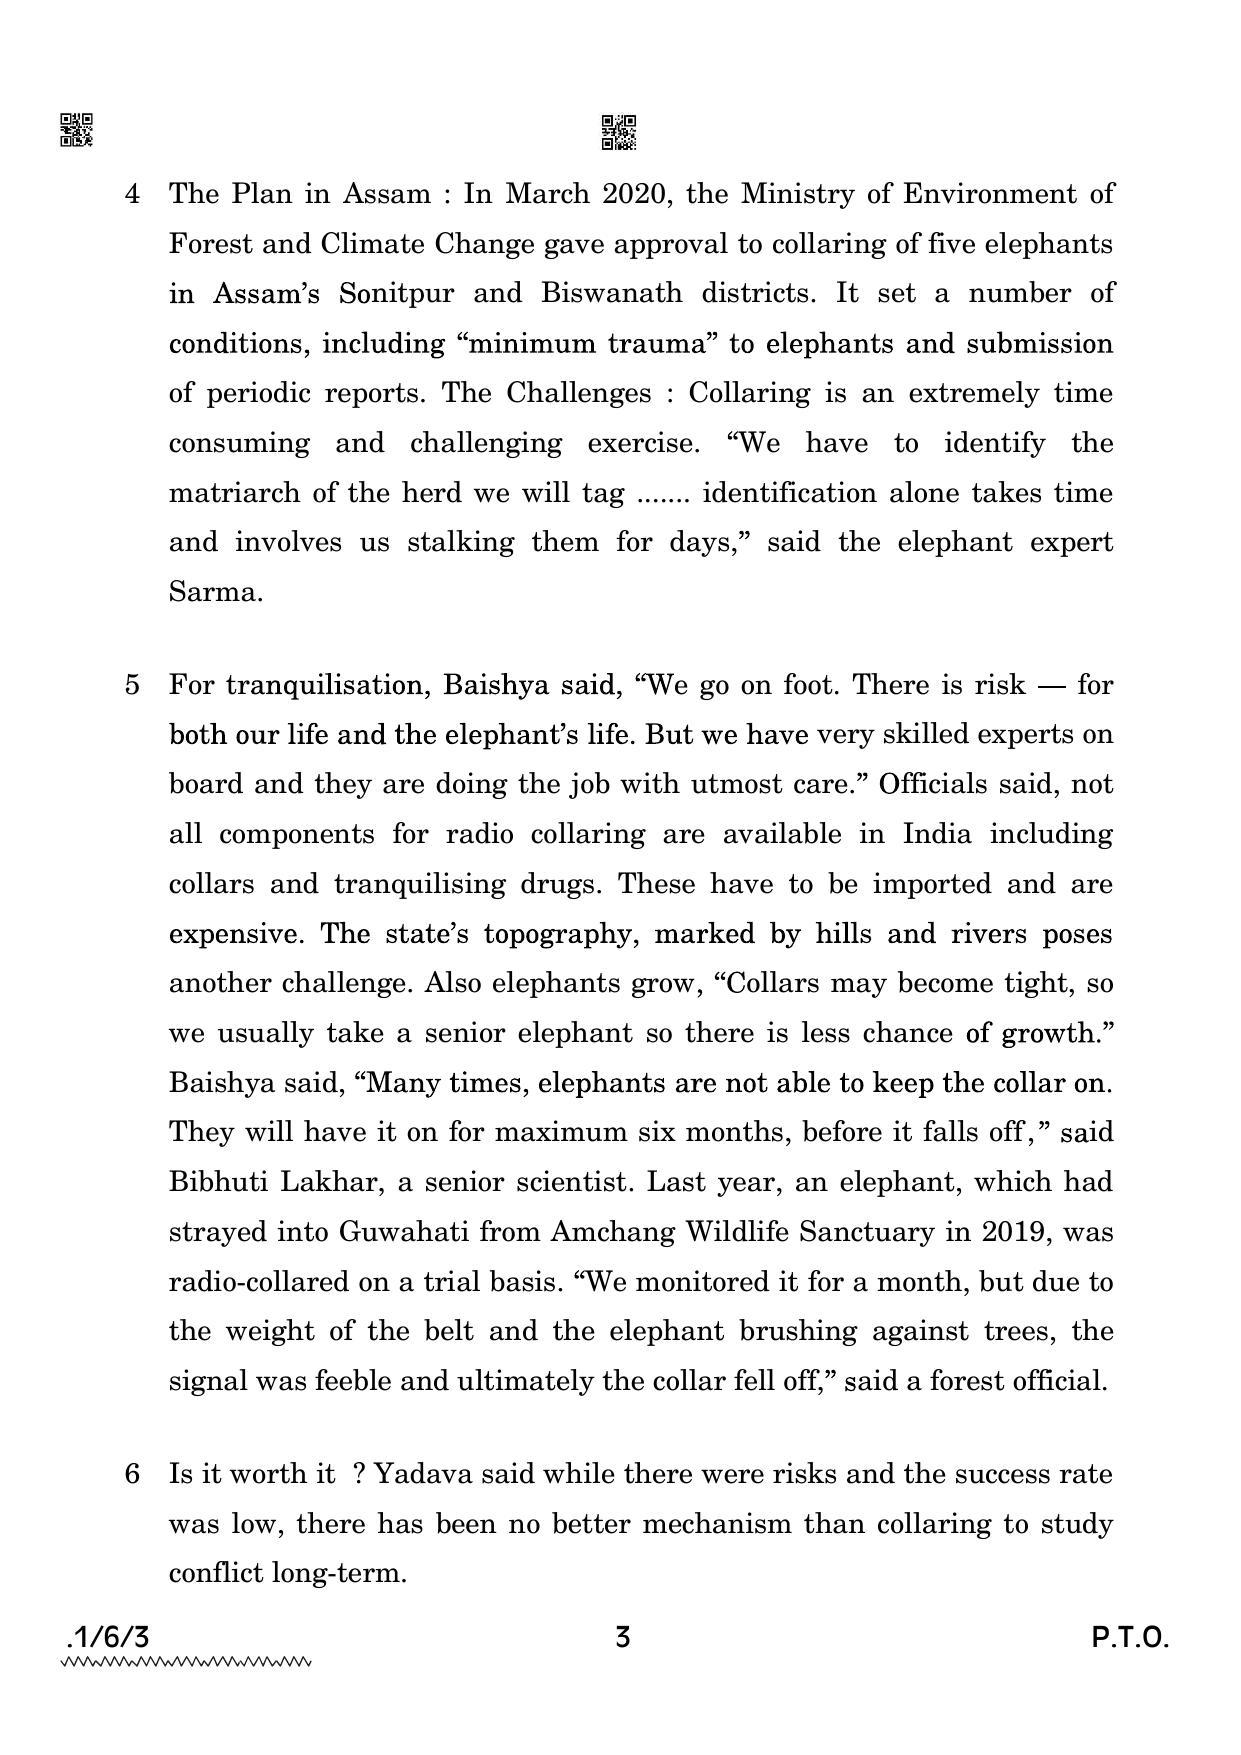 CBSE Class 12 1-6-3 ENGLISH CORE 2022 Compartment Question Paper - Page 3